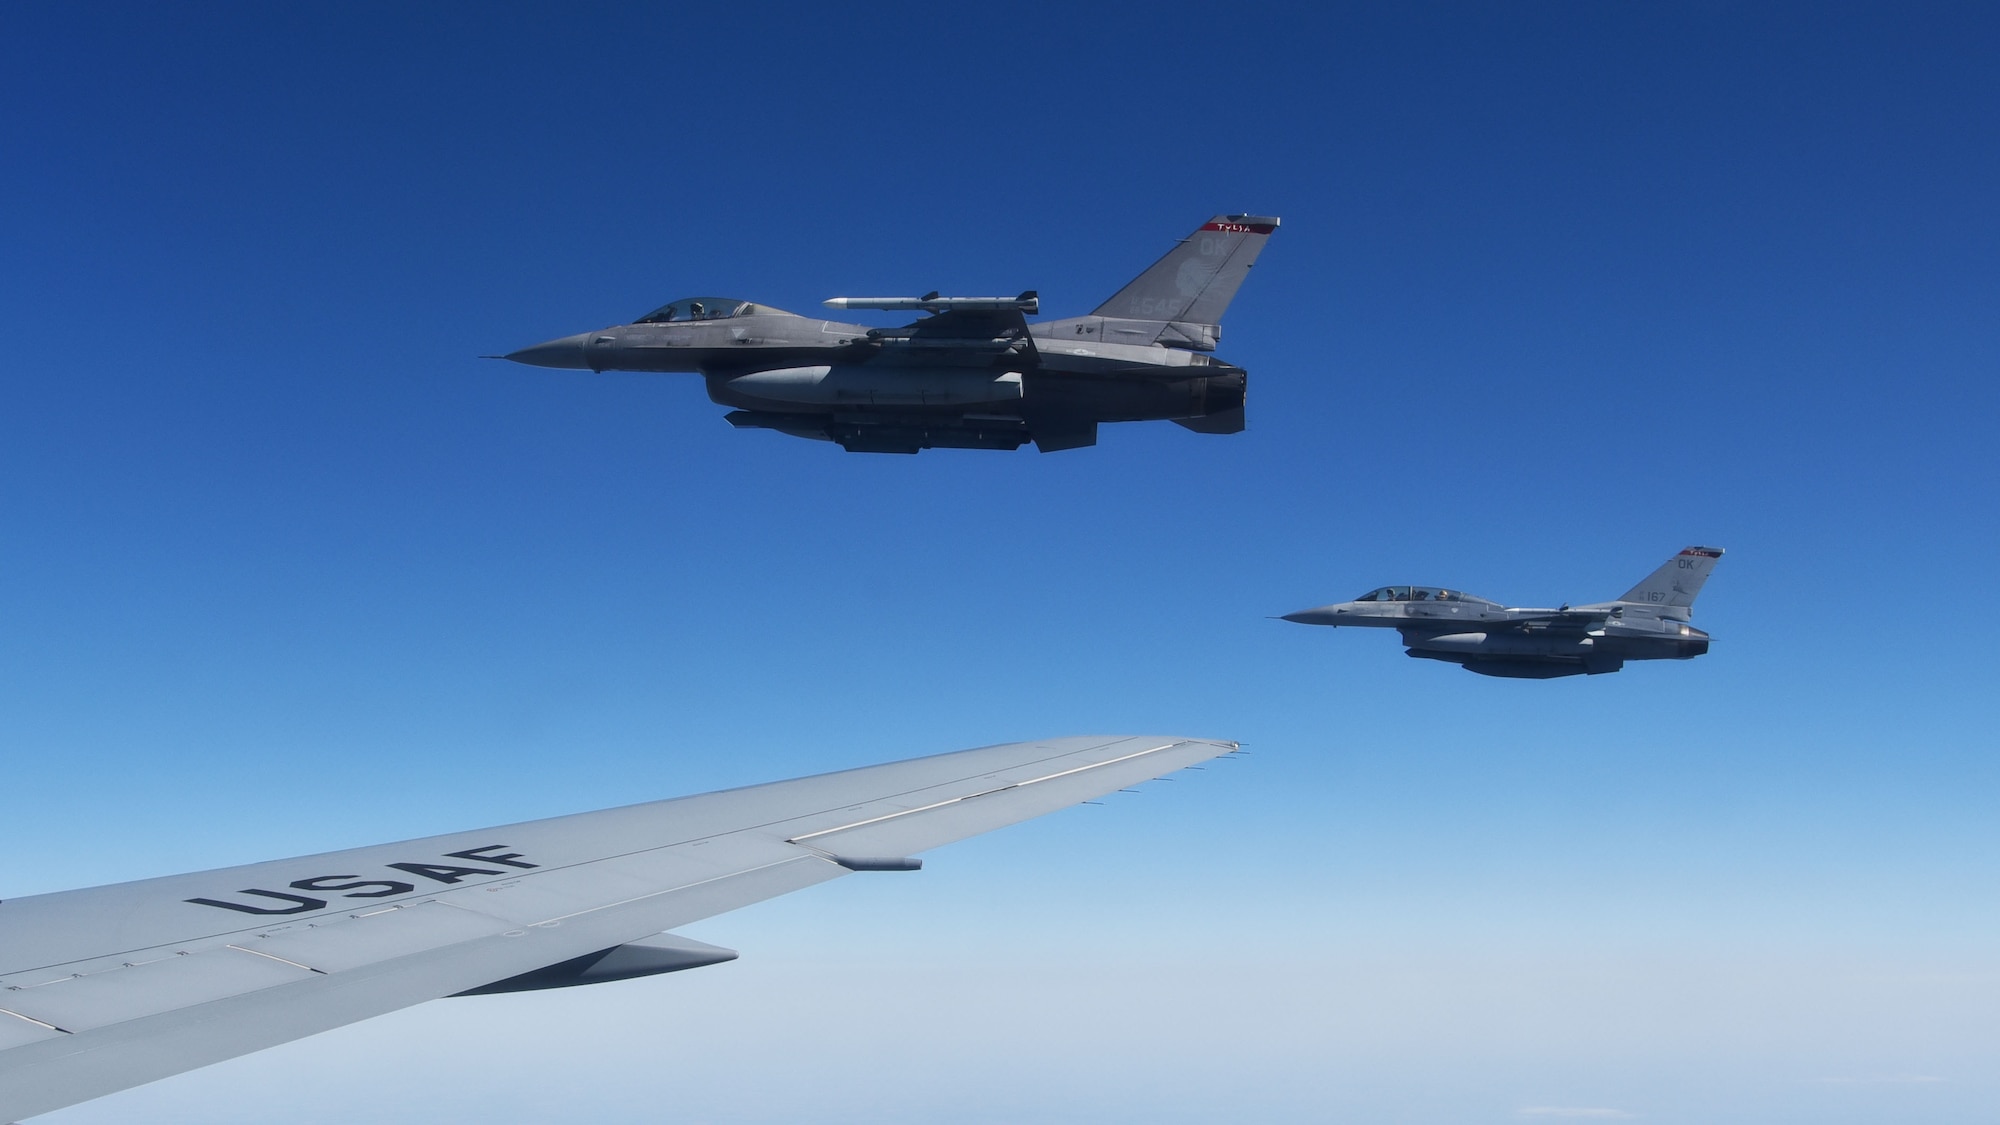 Two F-16 Fighting Falcons from the 138th Fighter Wing, fly near the wing of a KC-46A Pegasus assigned to McConnell Air Force Base, Kan., April 10, 2021. The F-16s were two of eight being refueled by an aircrew from the 931st Air Refueling Wing. The F-16 is capable of traveling speeds up to 1,500 miles per hour, they can burn up to 8,000 pounds of fuel at low altitude.